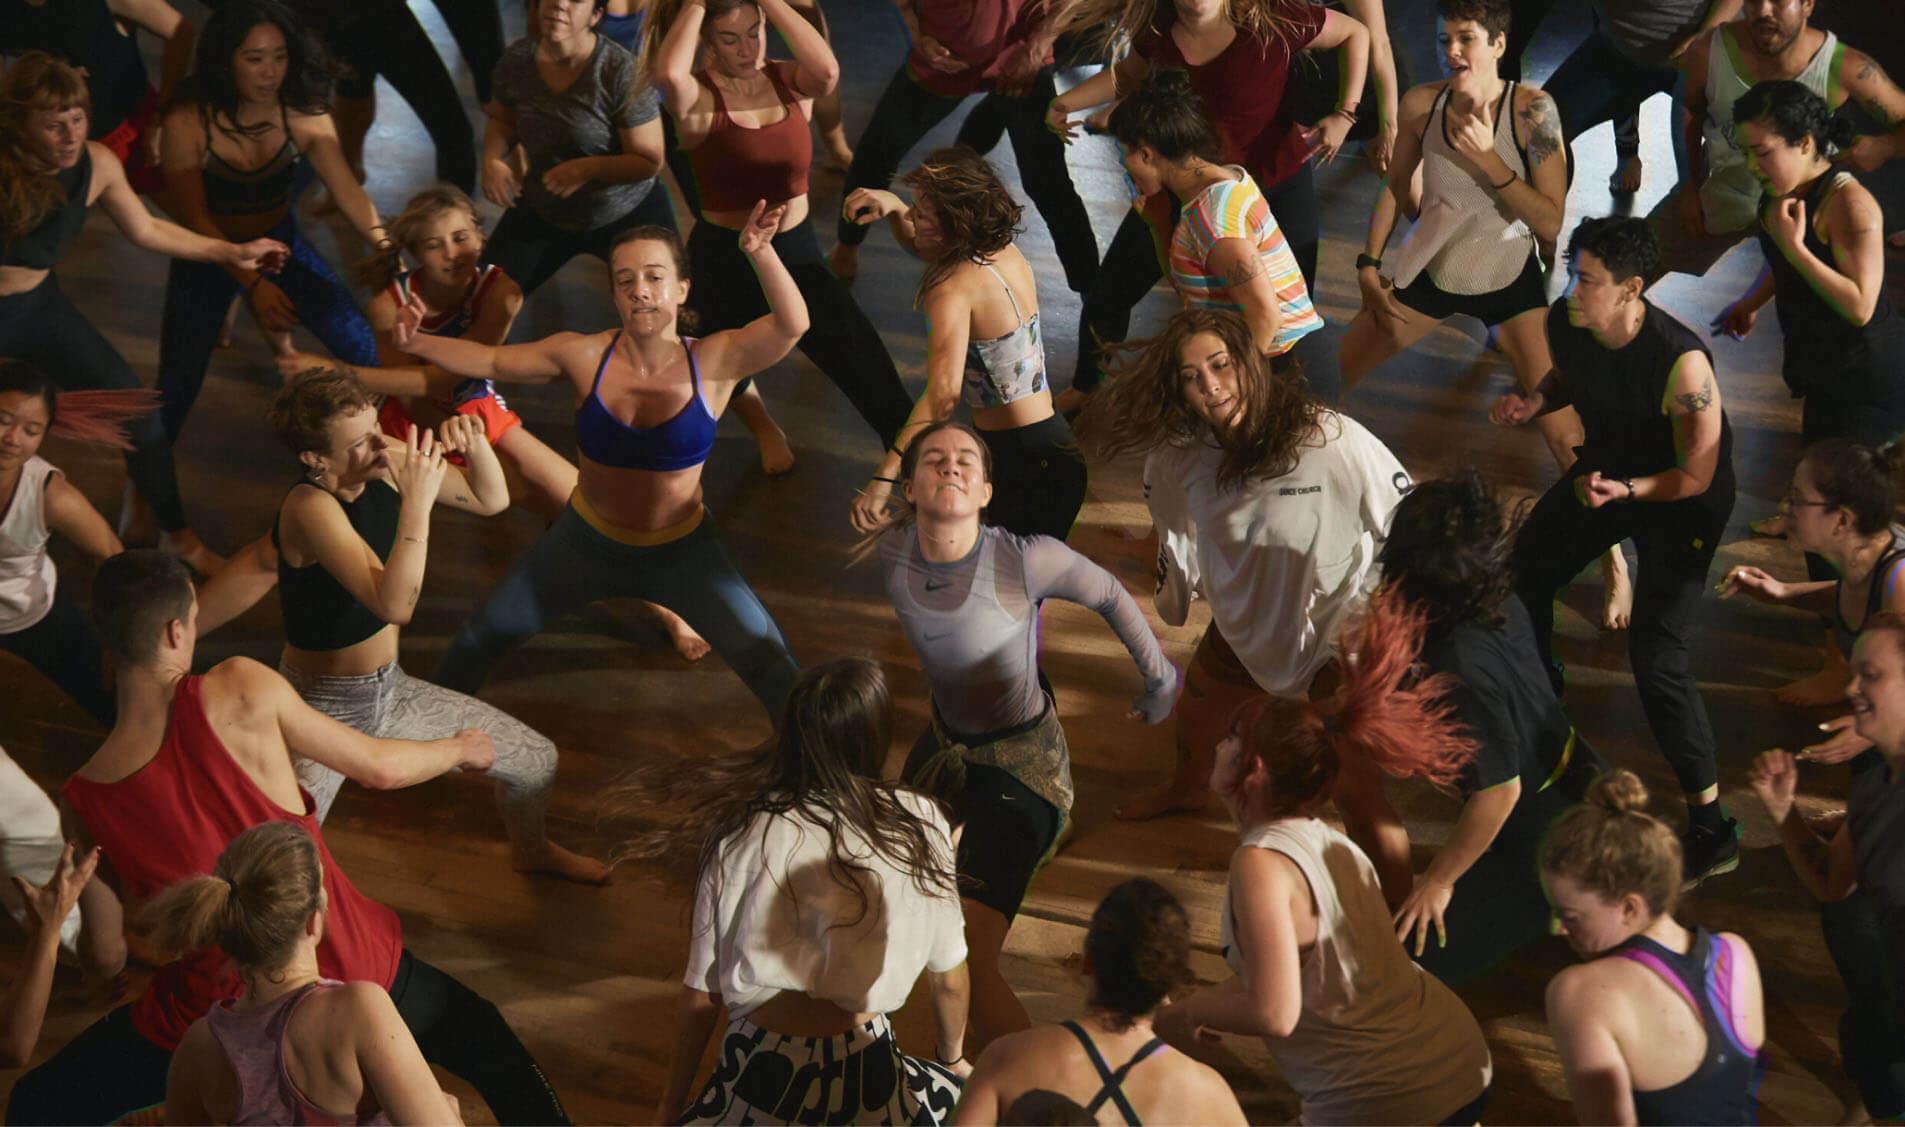 The Recent Resurgence of Dance-Based Fitness Is as Much About Catharsis as Cardio